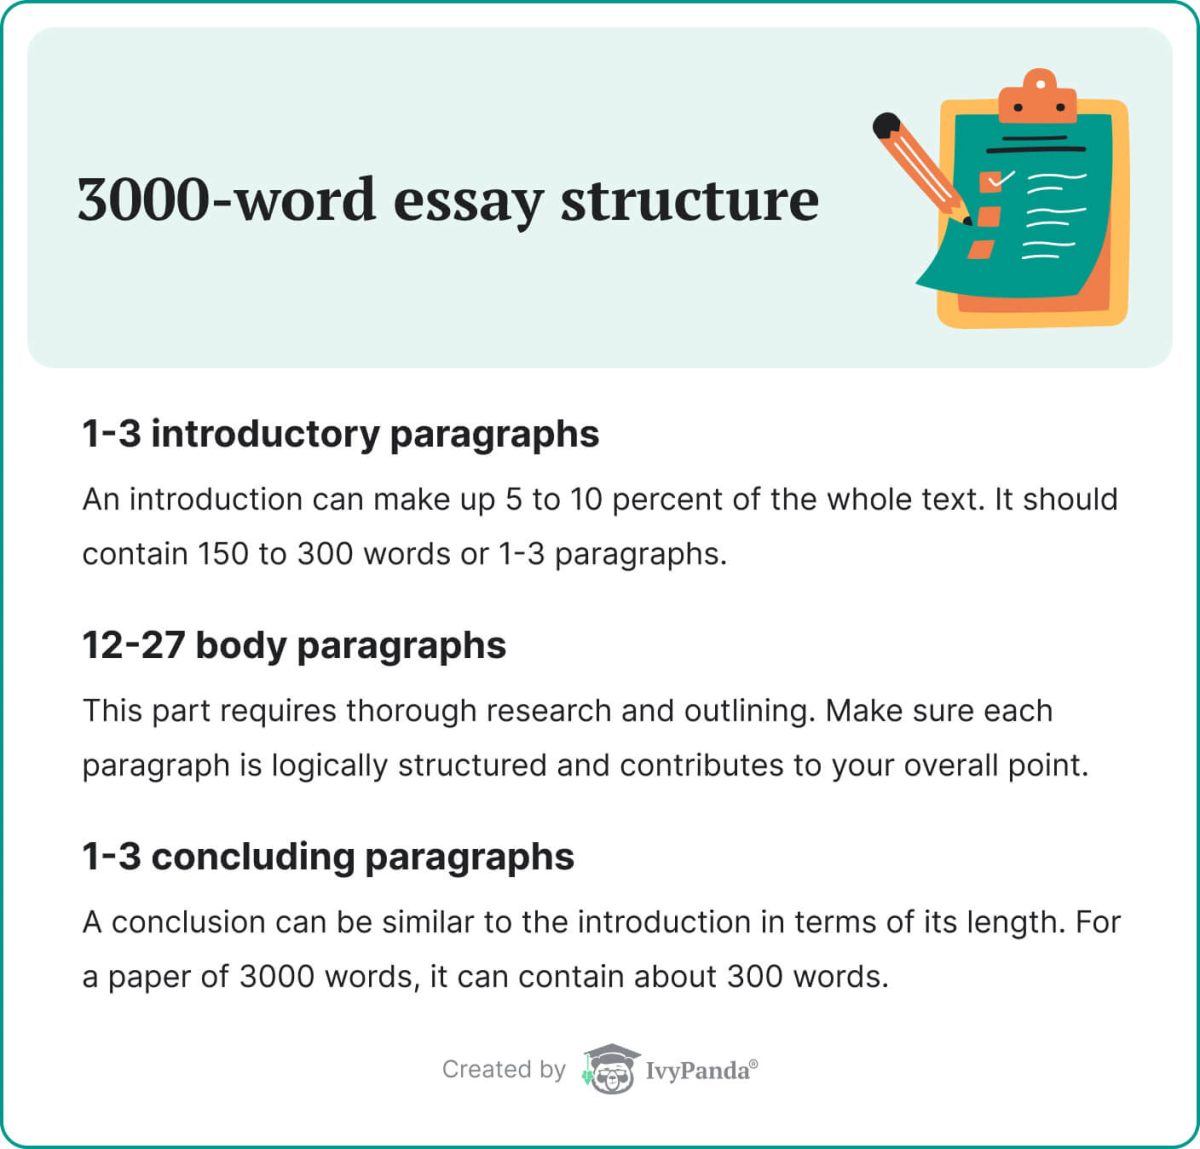 This image shows the 3000-word essay structure.